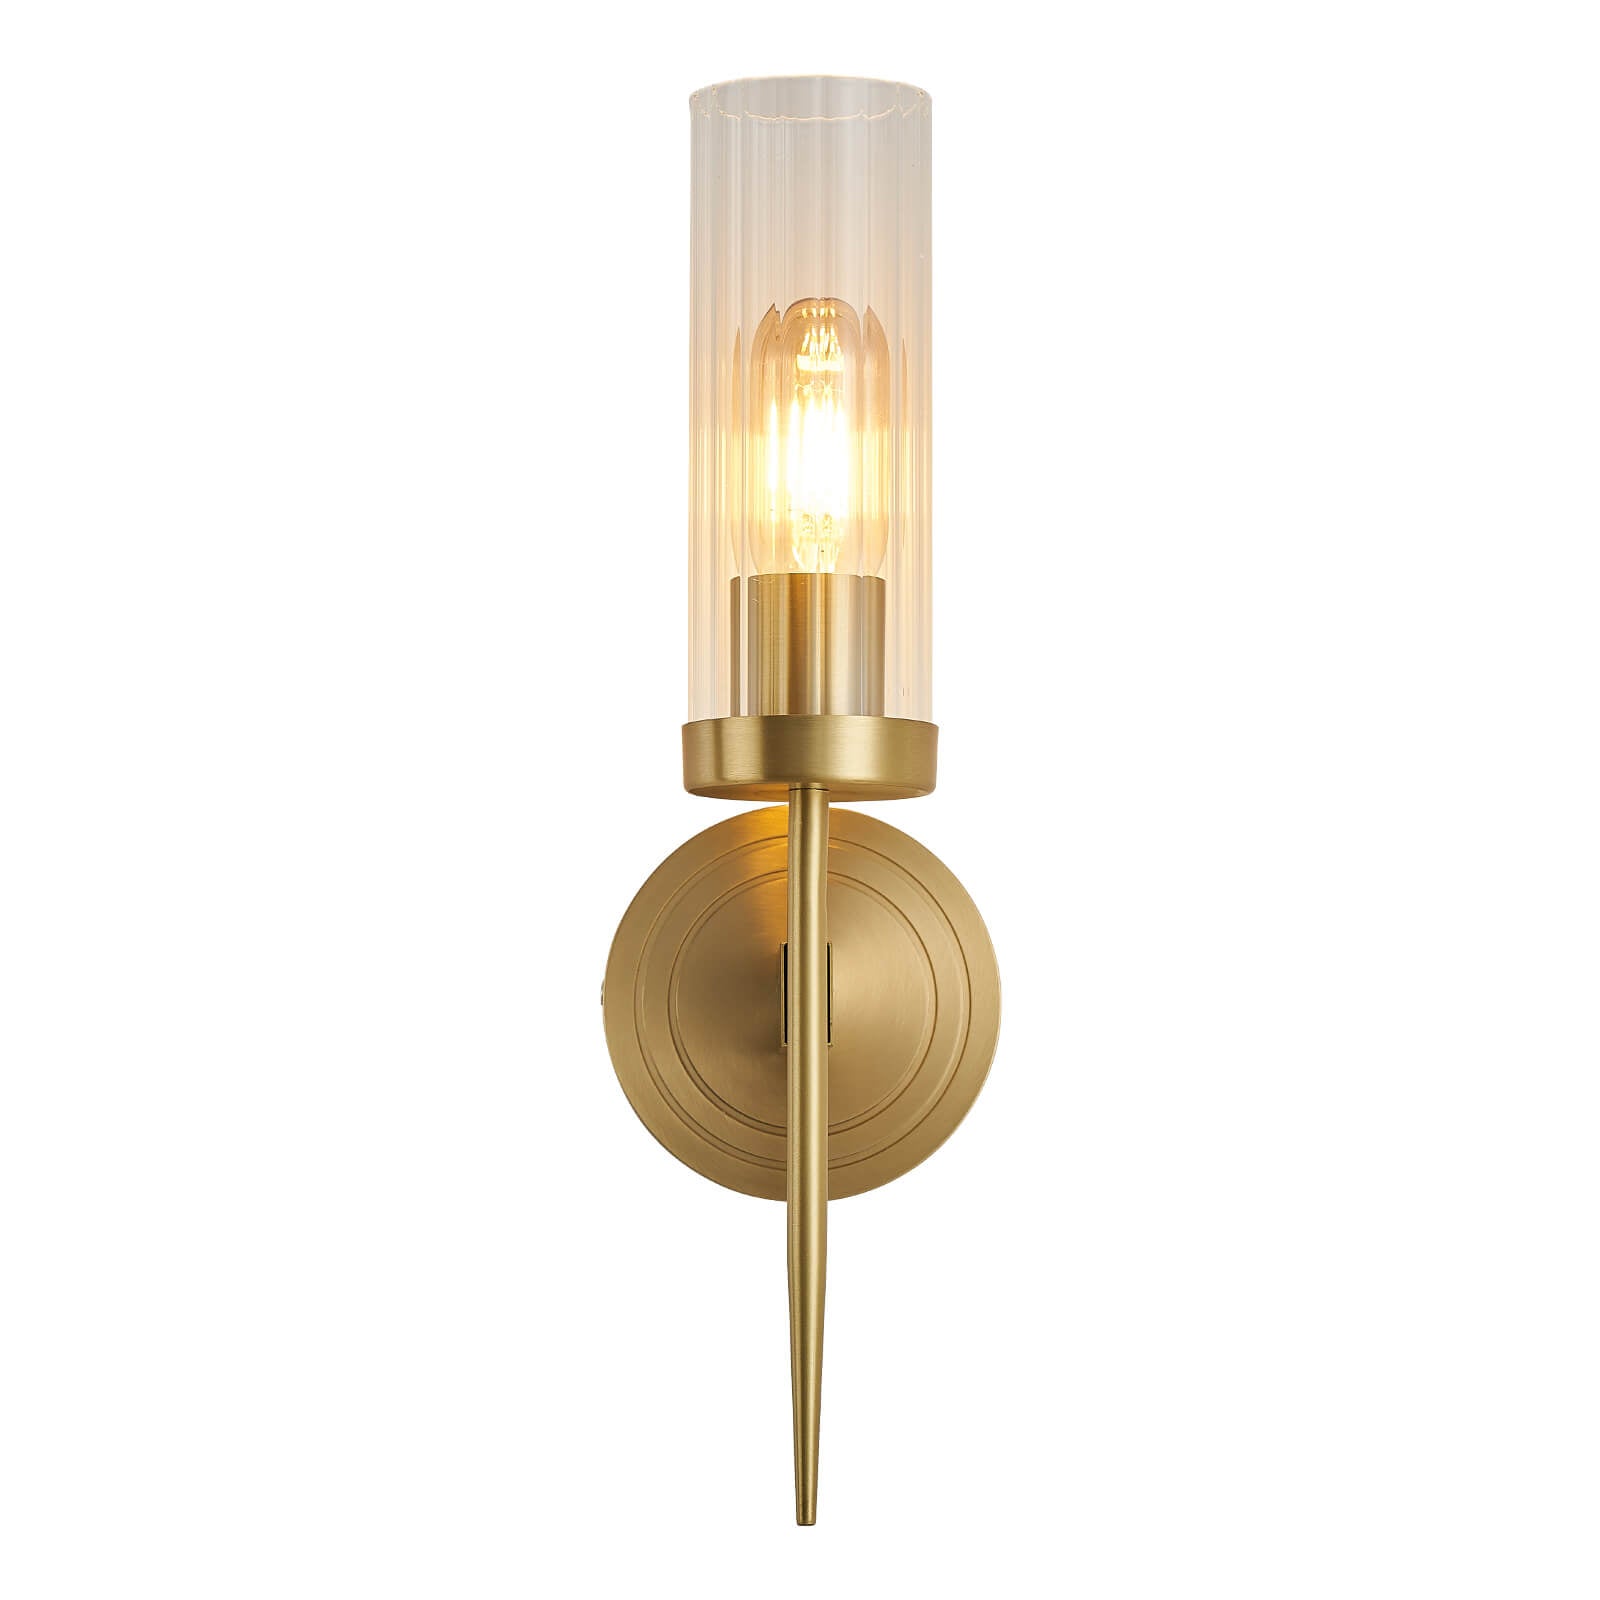 Copper Cylindrical Glass Cover Wall Lamp